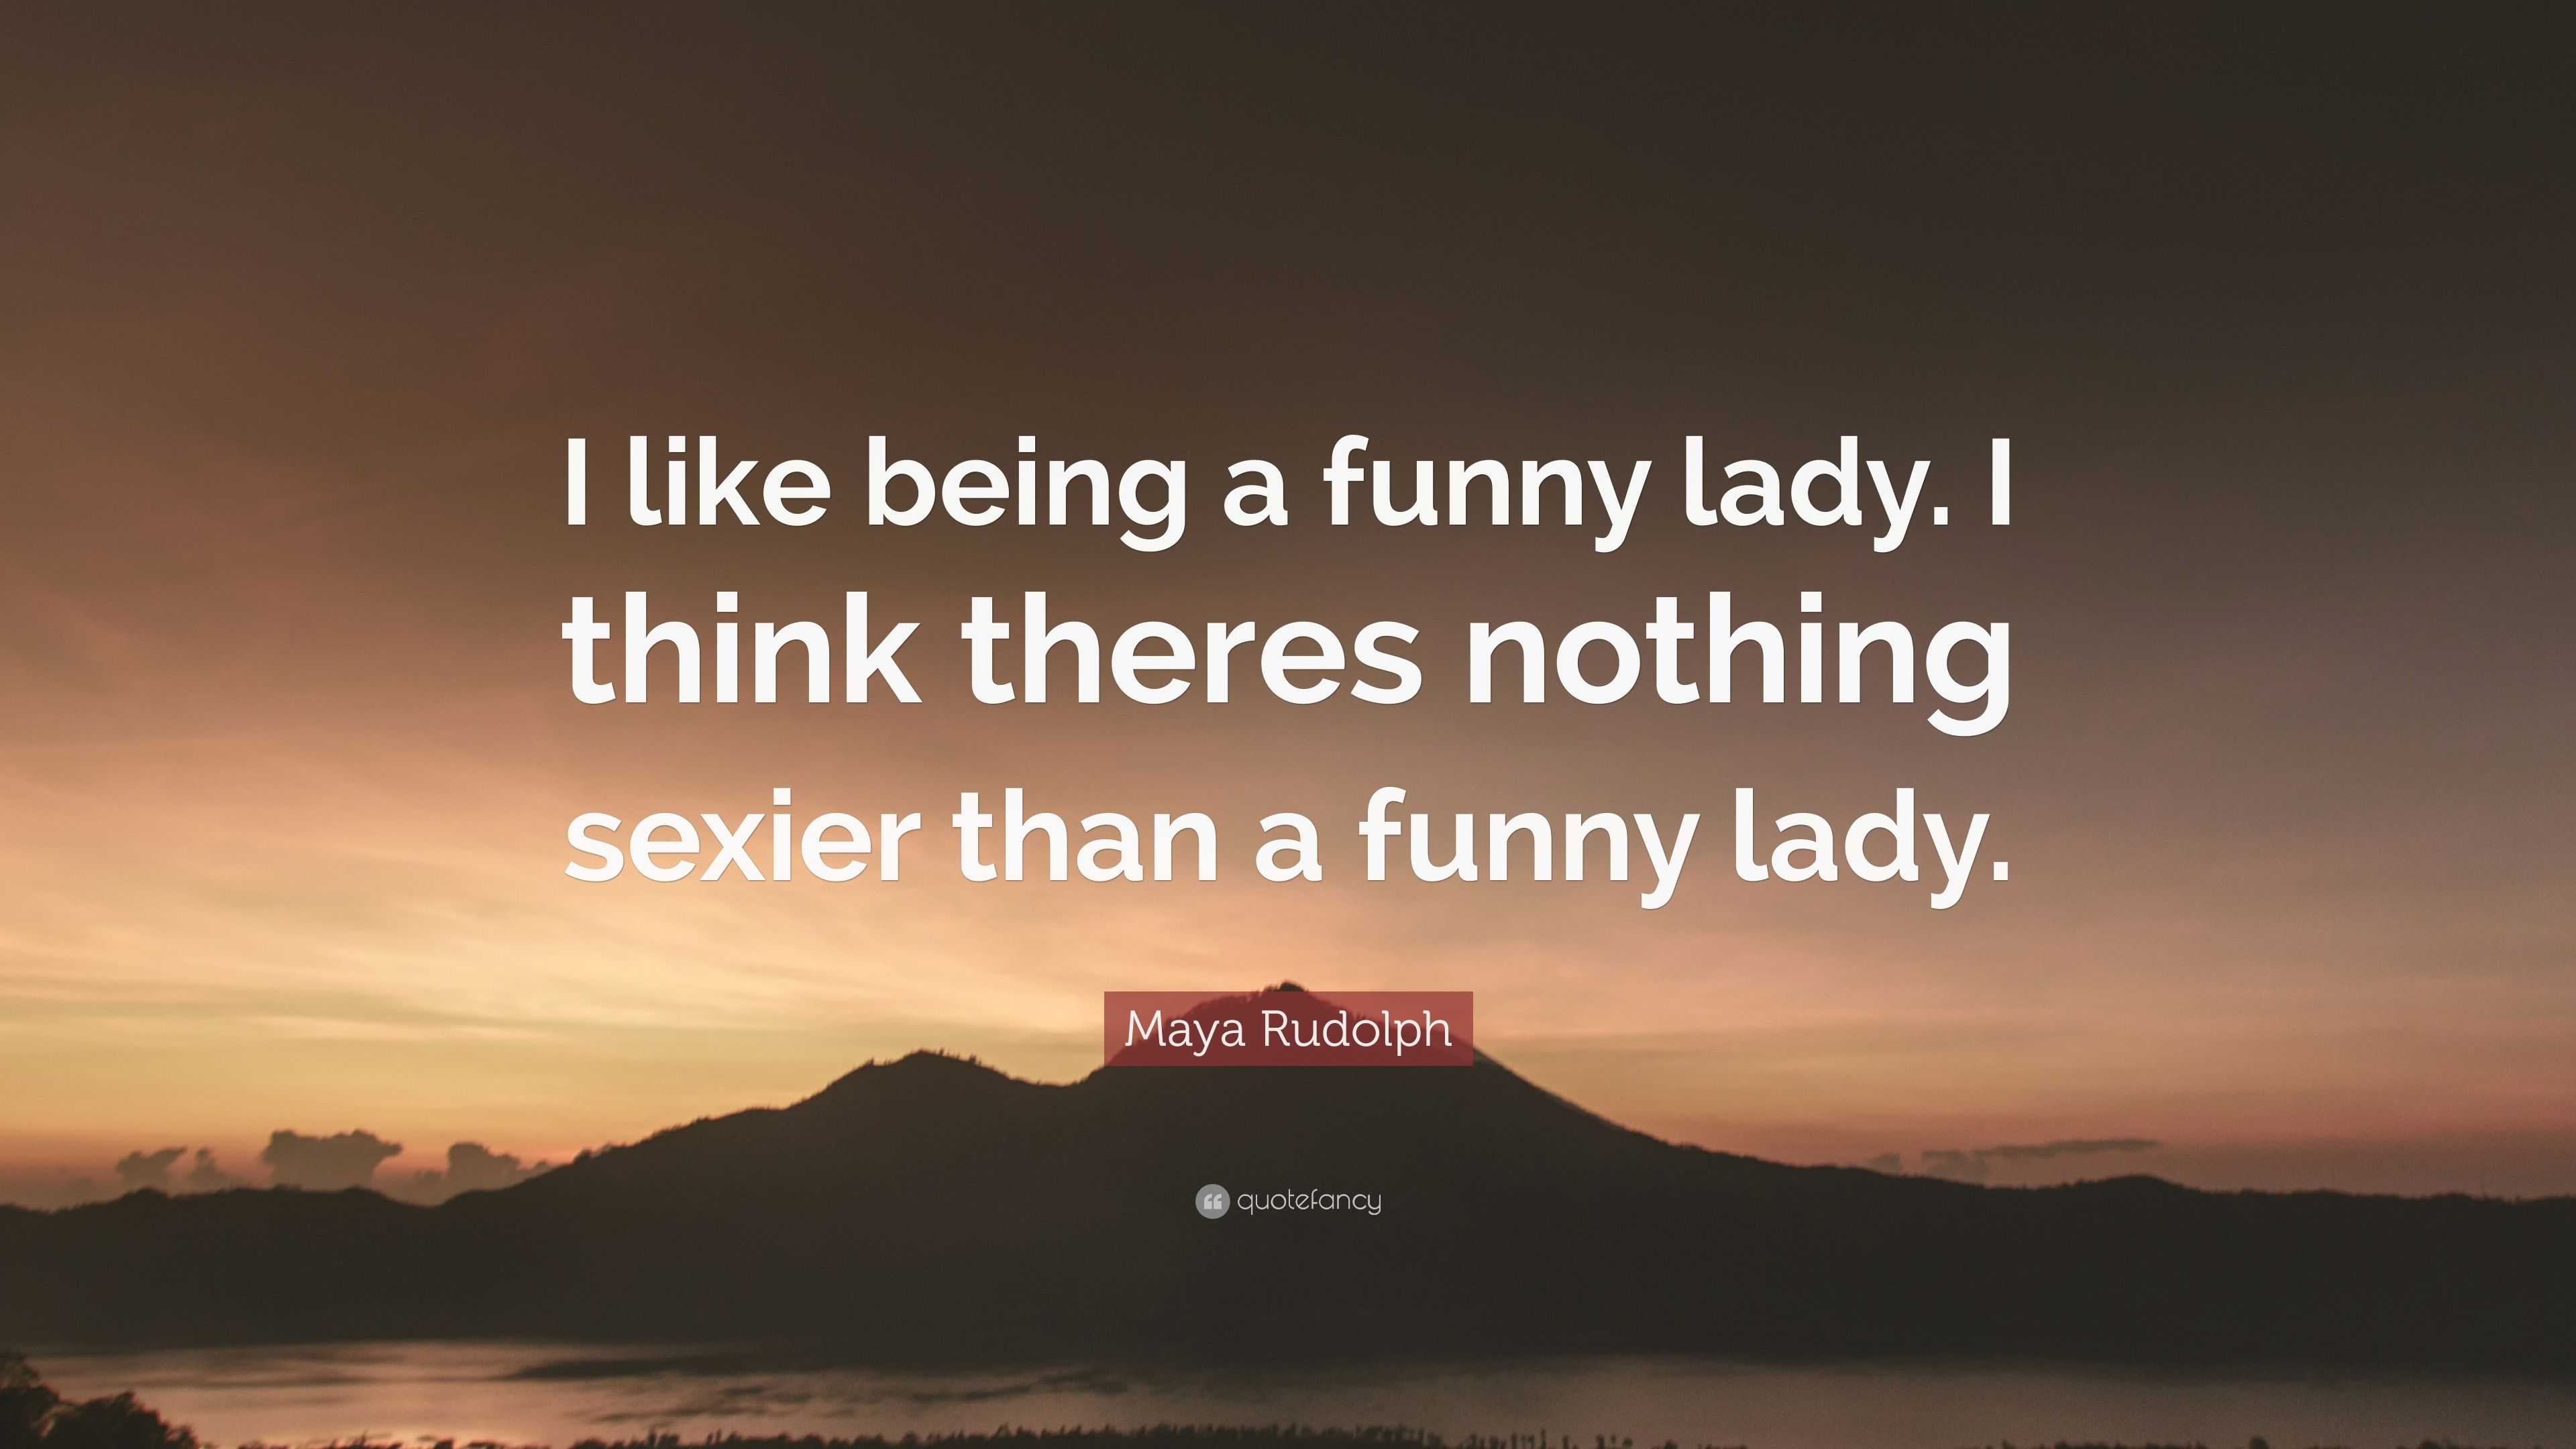 Maya Rudolph Quote “i Like Being A Funny Lady I Think Theres Nothing Sexier Than A Funny Lady”